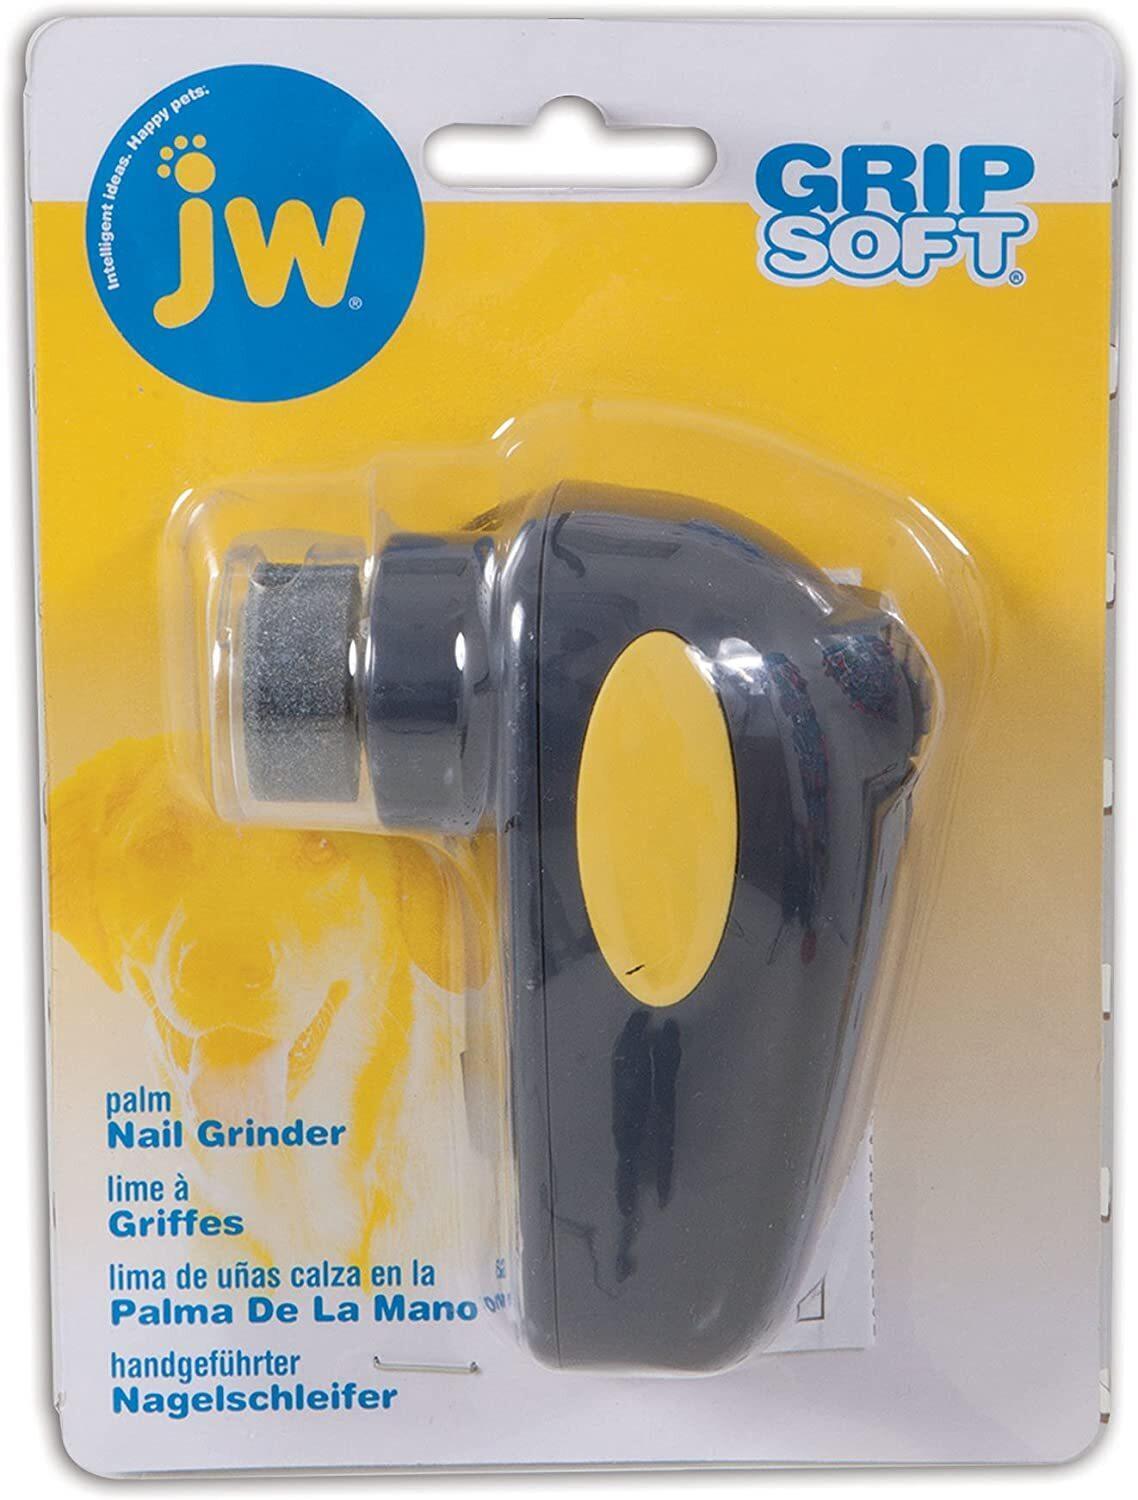 Dog & Cat Cordless Nail Grinder by JW GripSoft